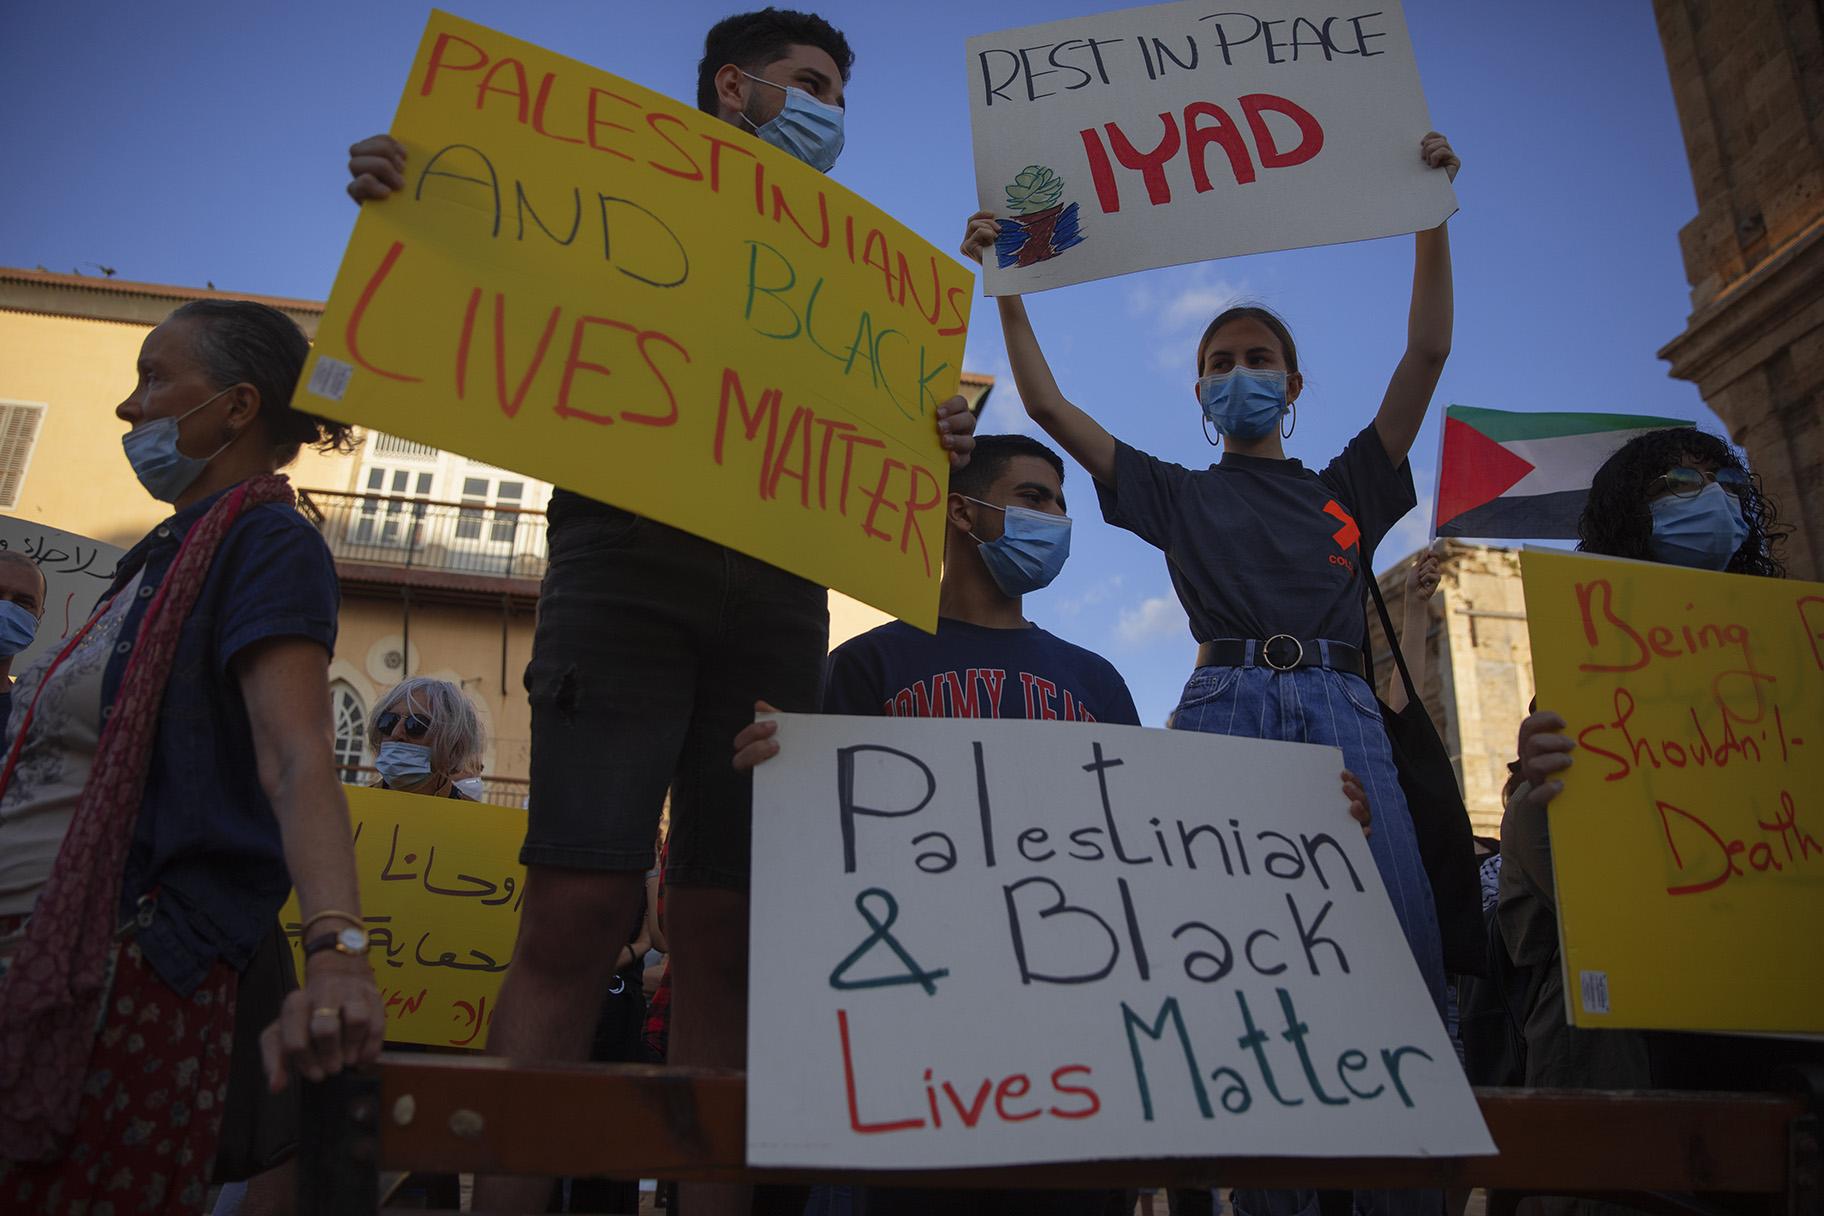 Protesters hold signs during a demonstration against the Israeli police after border police officers shot and killed Iyad al-Halak, an unarmed autistic Palestinian man, in the mixed Arab Jewish city of Jaffa, near Tel Aviv, Israel, after saying they suspected he was carrying a weapon, Sunday, May 31, 2020. Protesters gathered to protest the killing of al-Halak in Jerusalem and the killing of George Floyd in Minneapolis last week. (AP Photo / Oded Balilty)